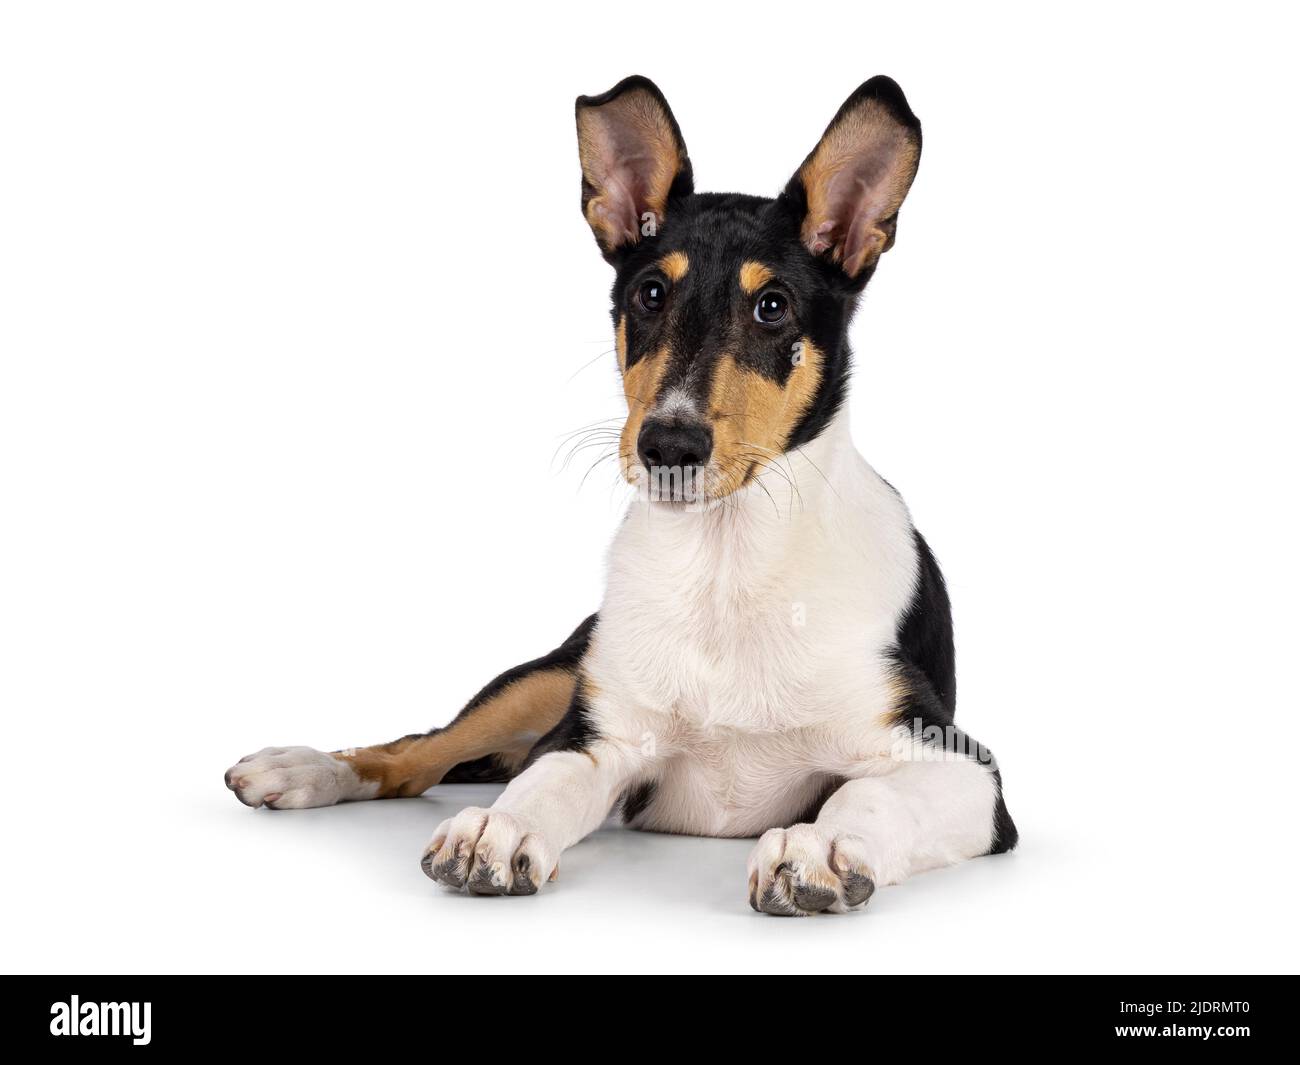 Cute young Smooth Collie dog, laying down facing front. Looking towards camera. Isolated on a white background. Stock Photo